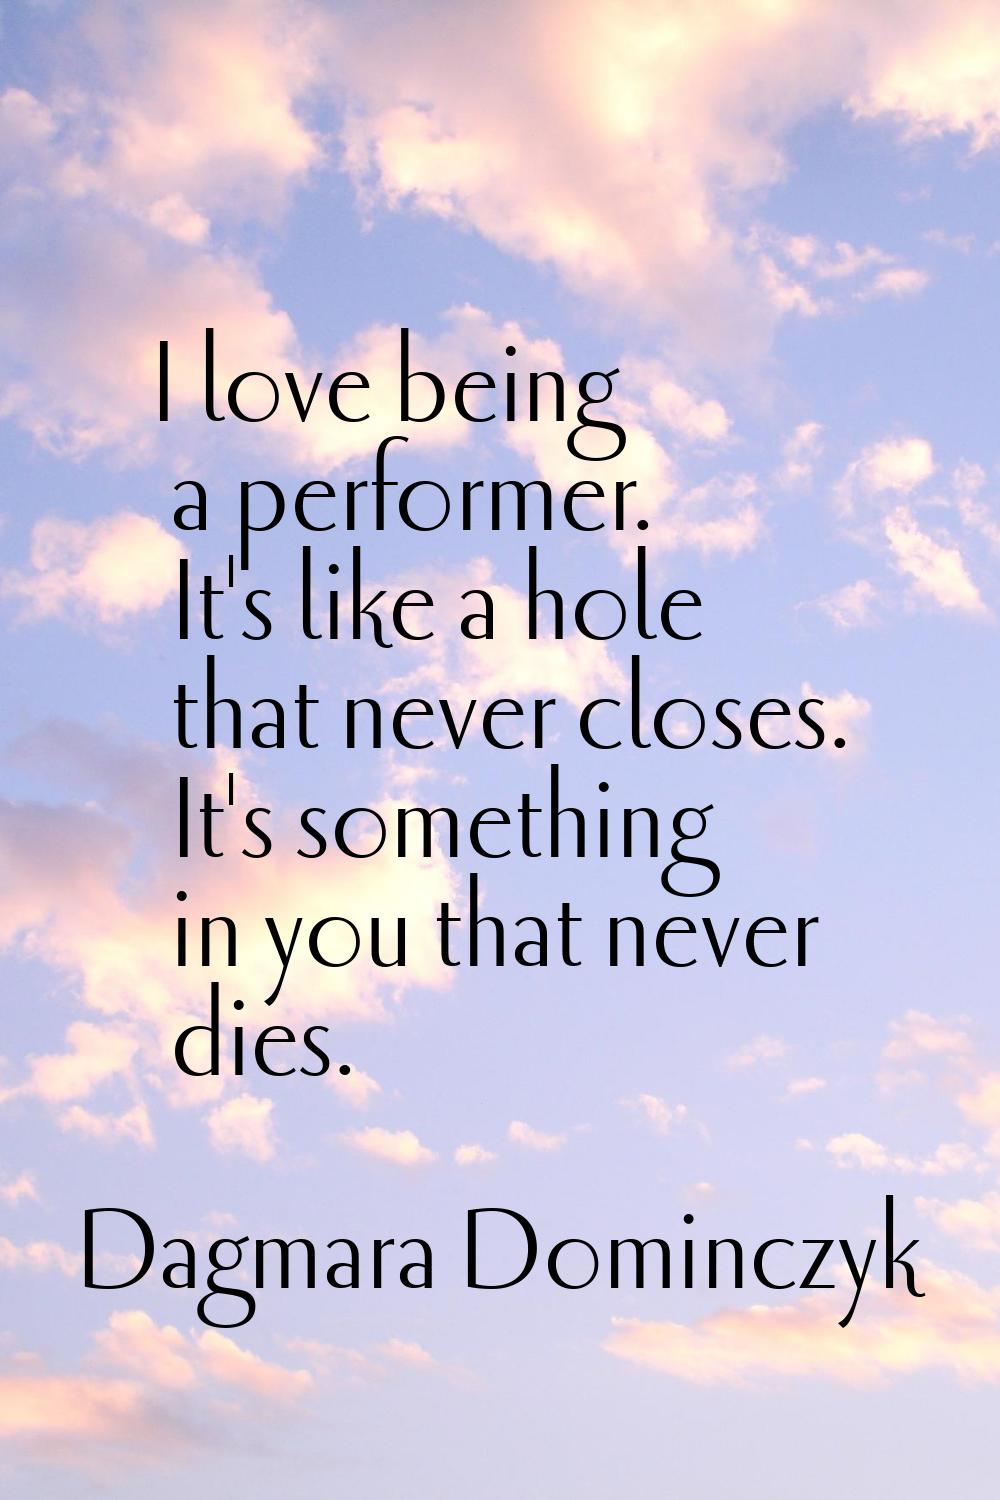 I love being a performer. It's like a hole that never closes. It's something in you that never dies